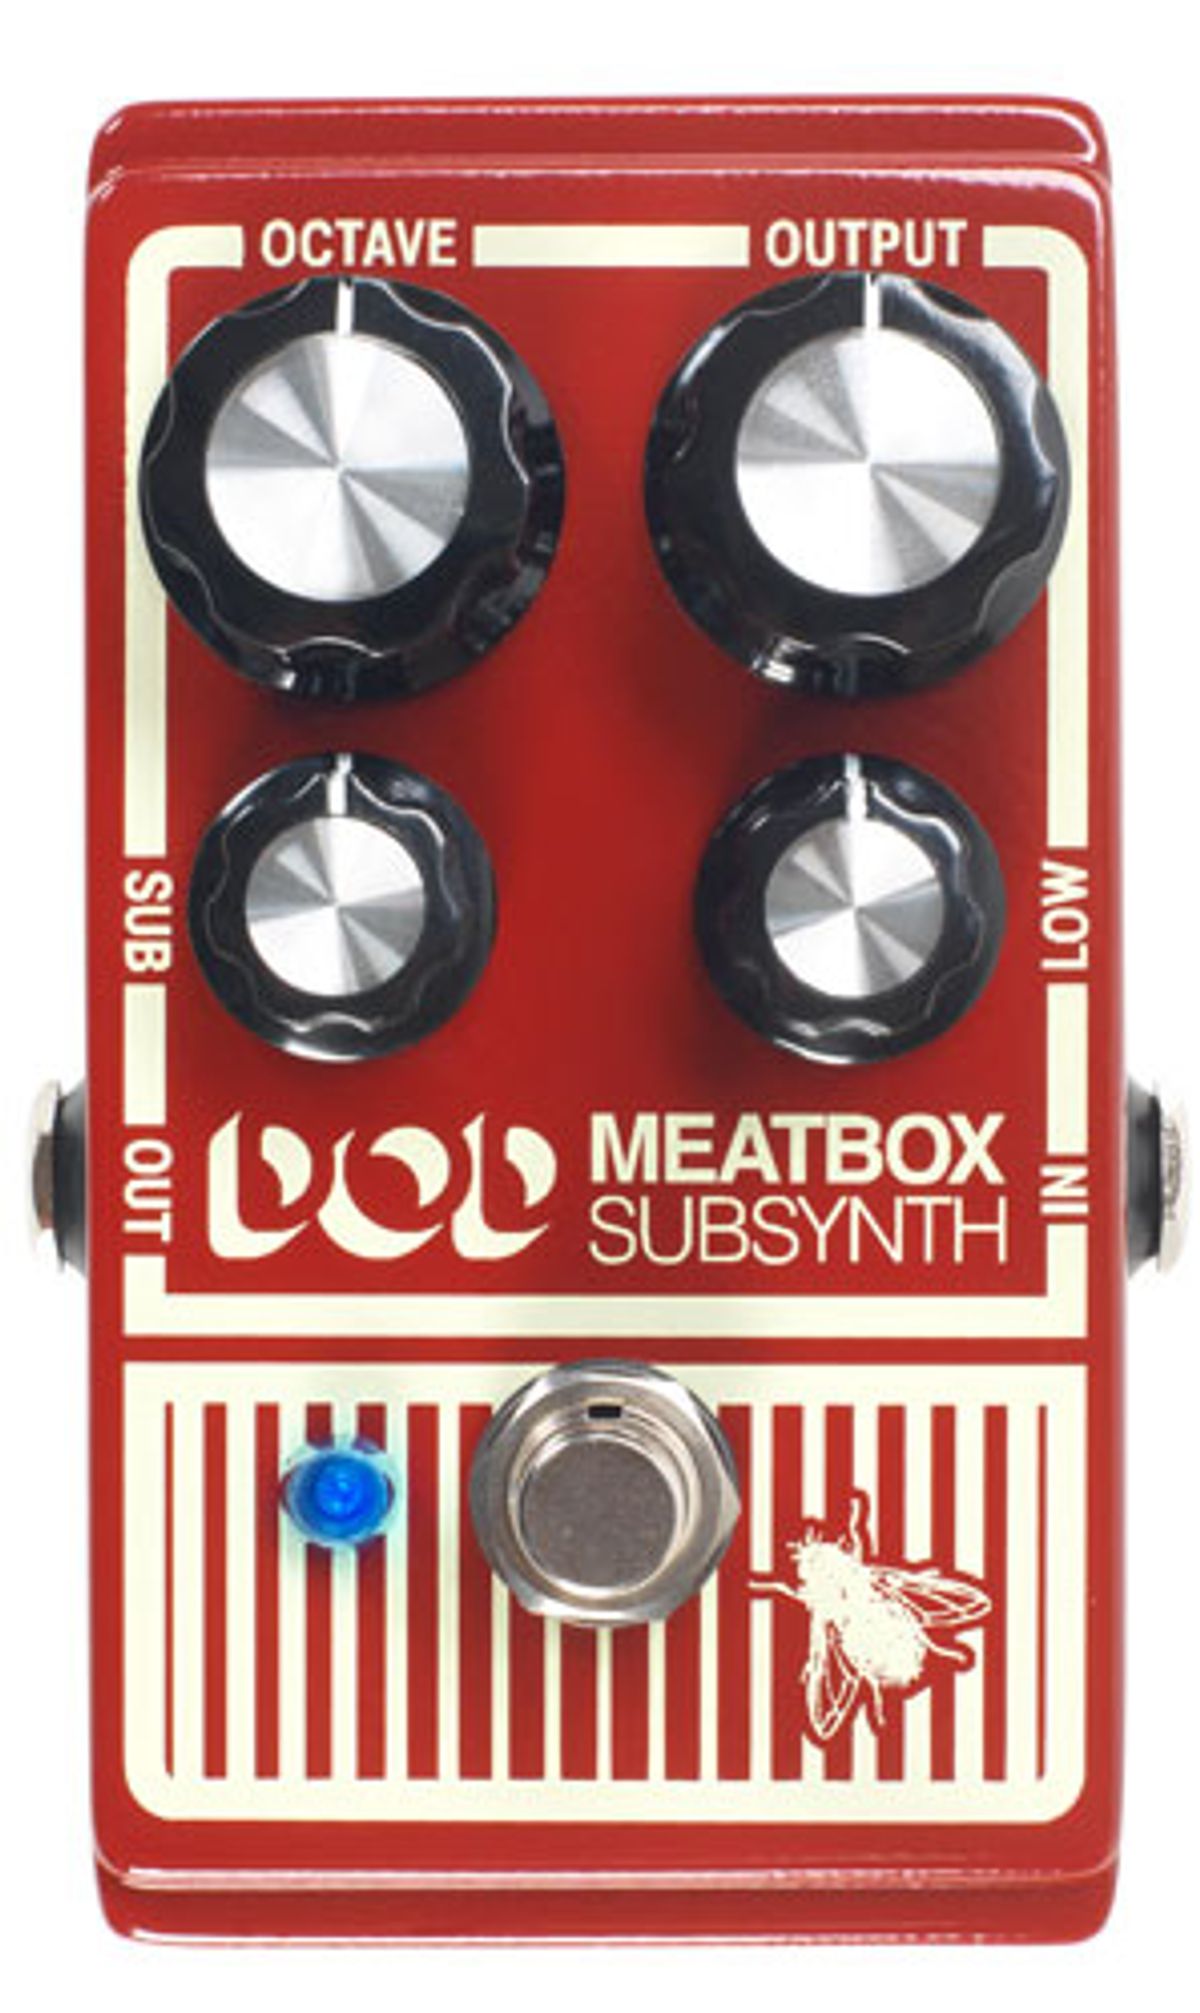 DigiTech Reissues the DOD Meatbox Subharmonic Bass Synthesizer